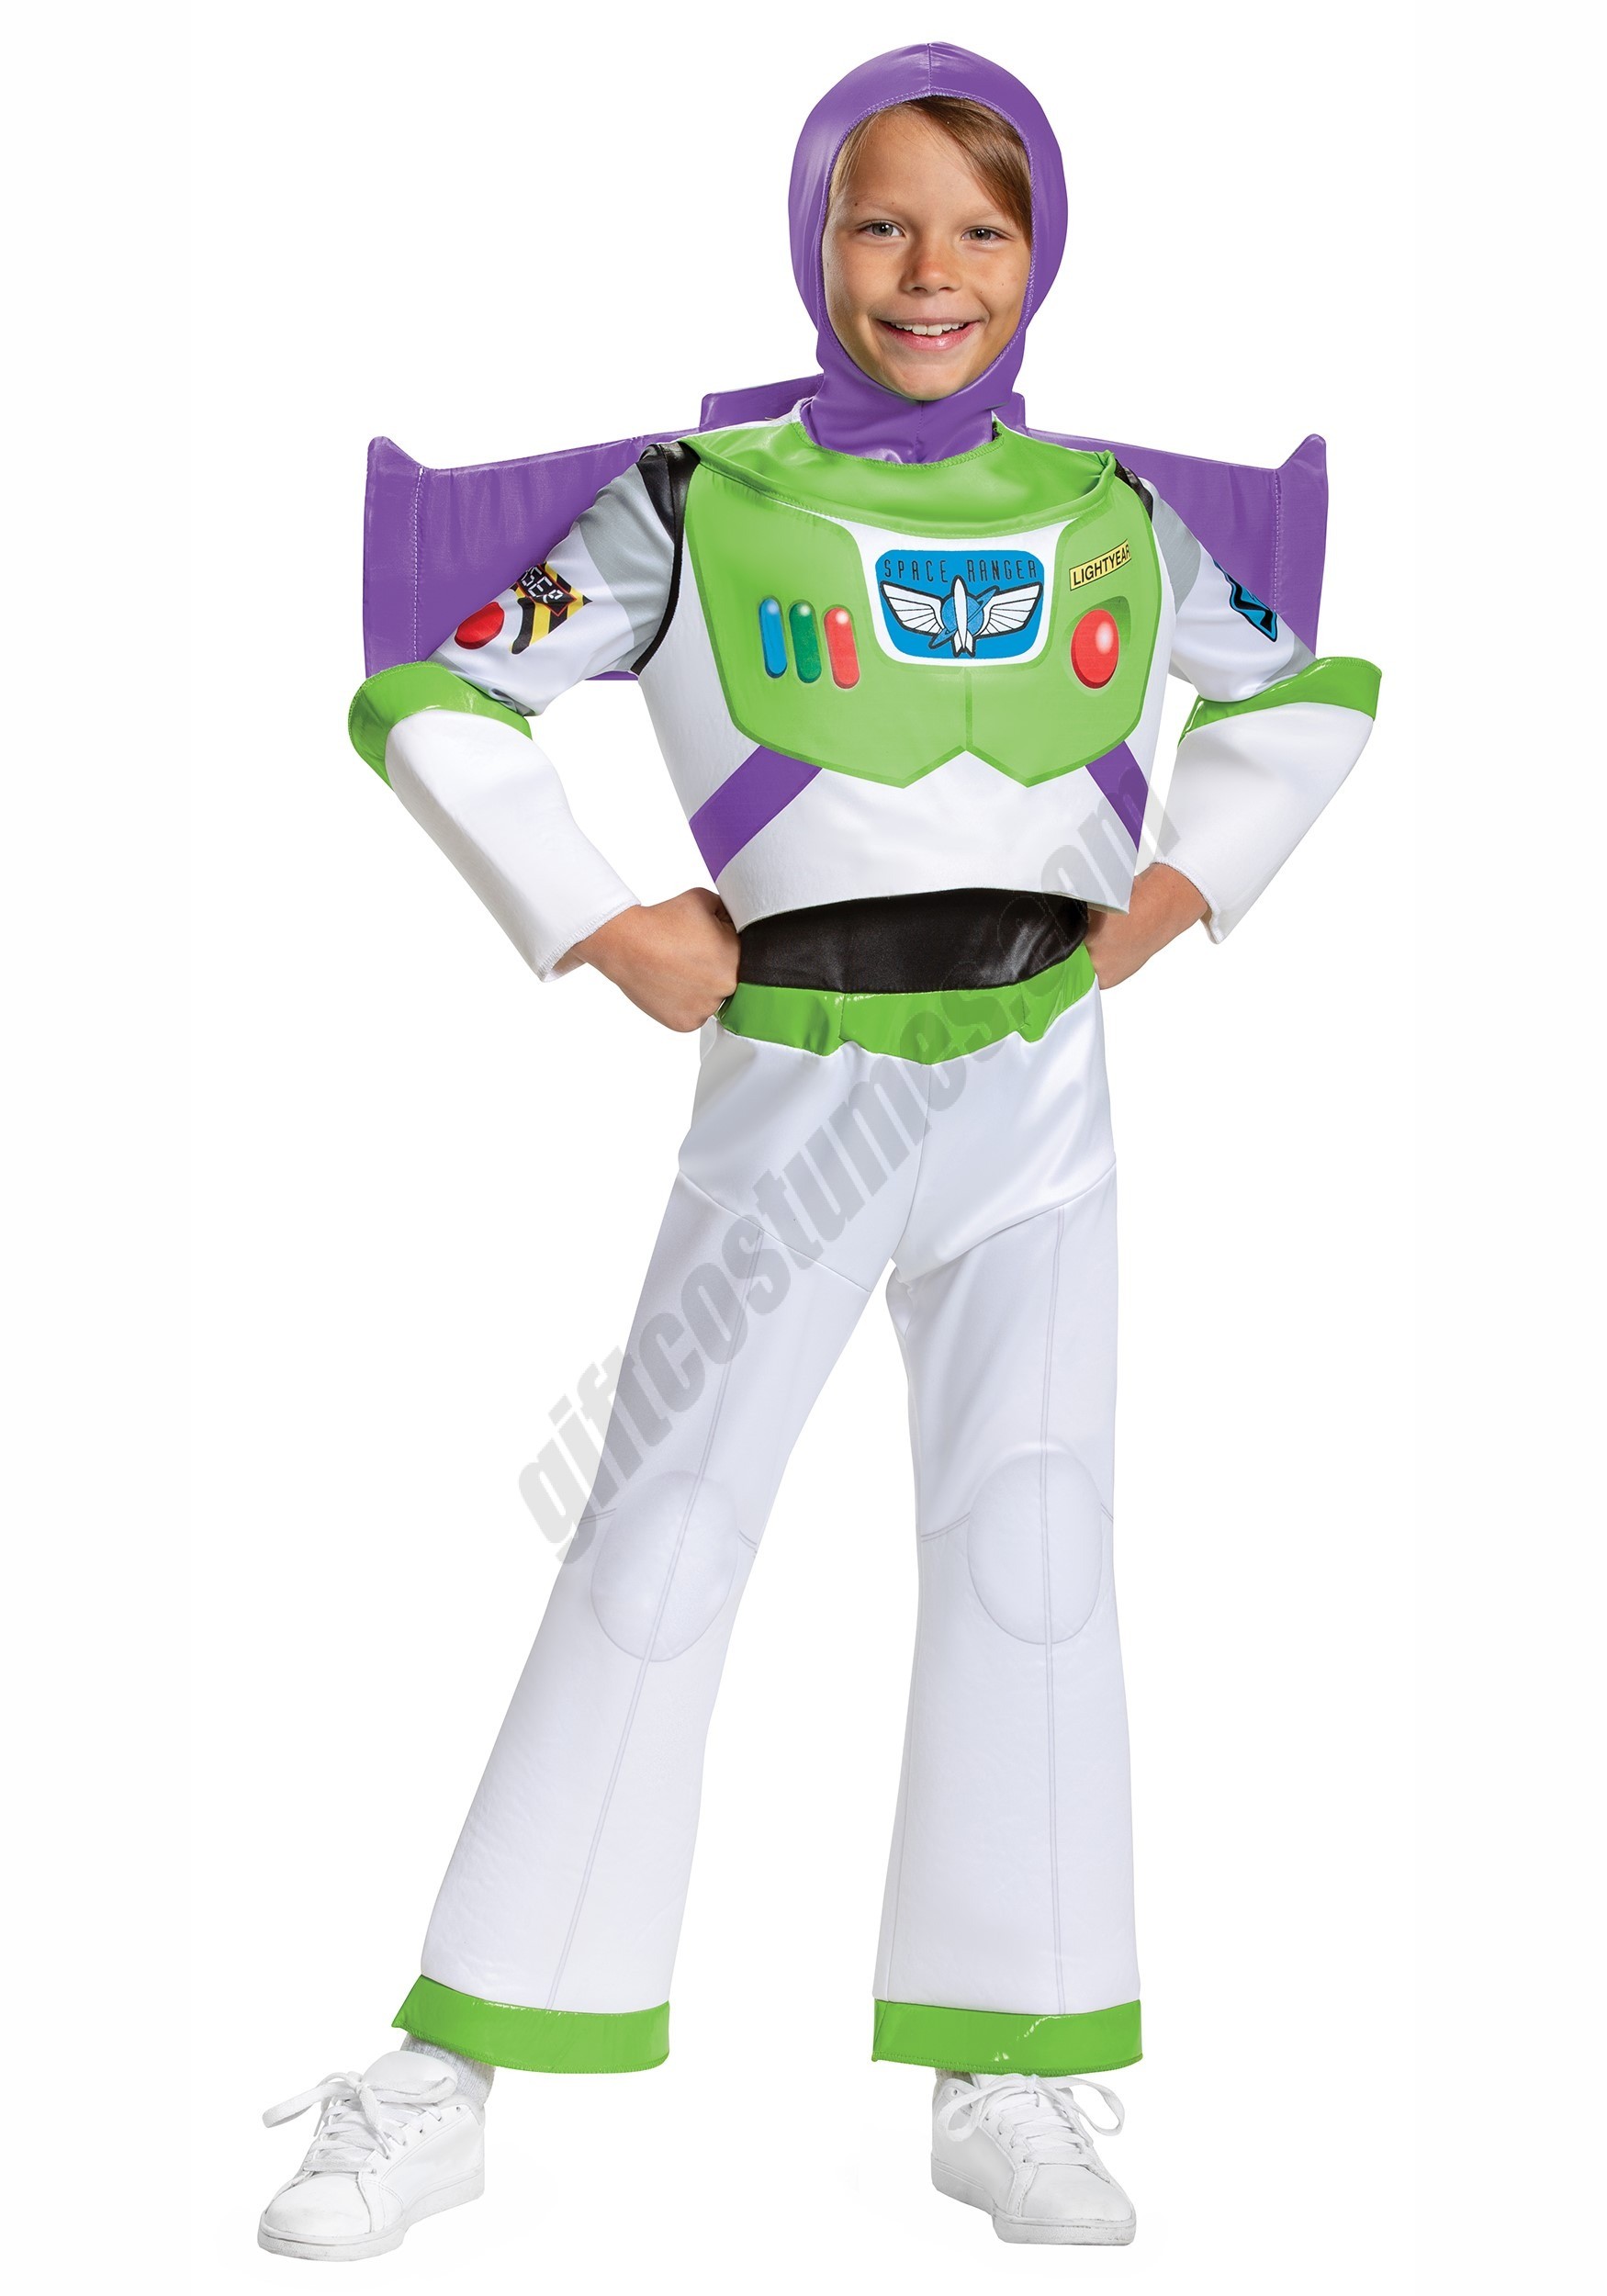 Toy Story Toddler Buzz Lightyear Deluxe Costume Promotions - Toy Story Toddler Buzz Lightyear Deluxe Costume Promotions